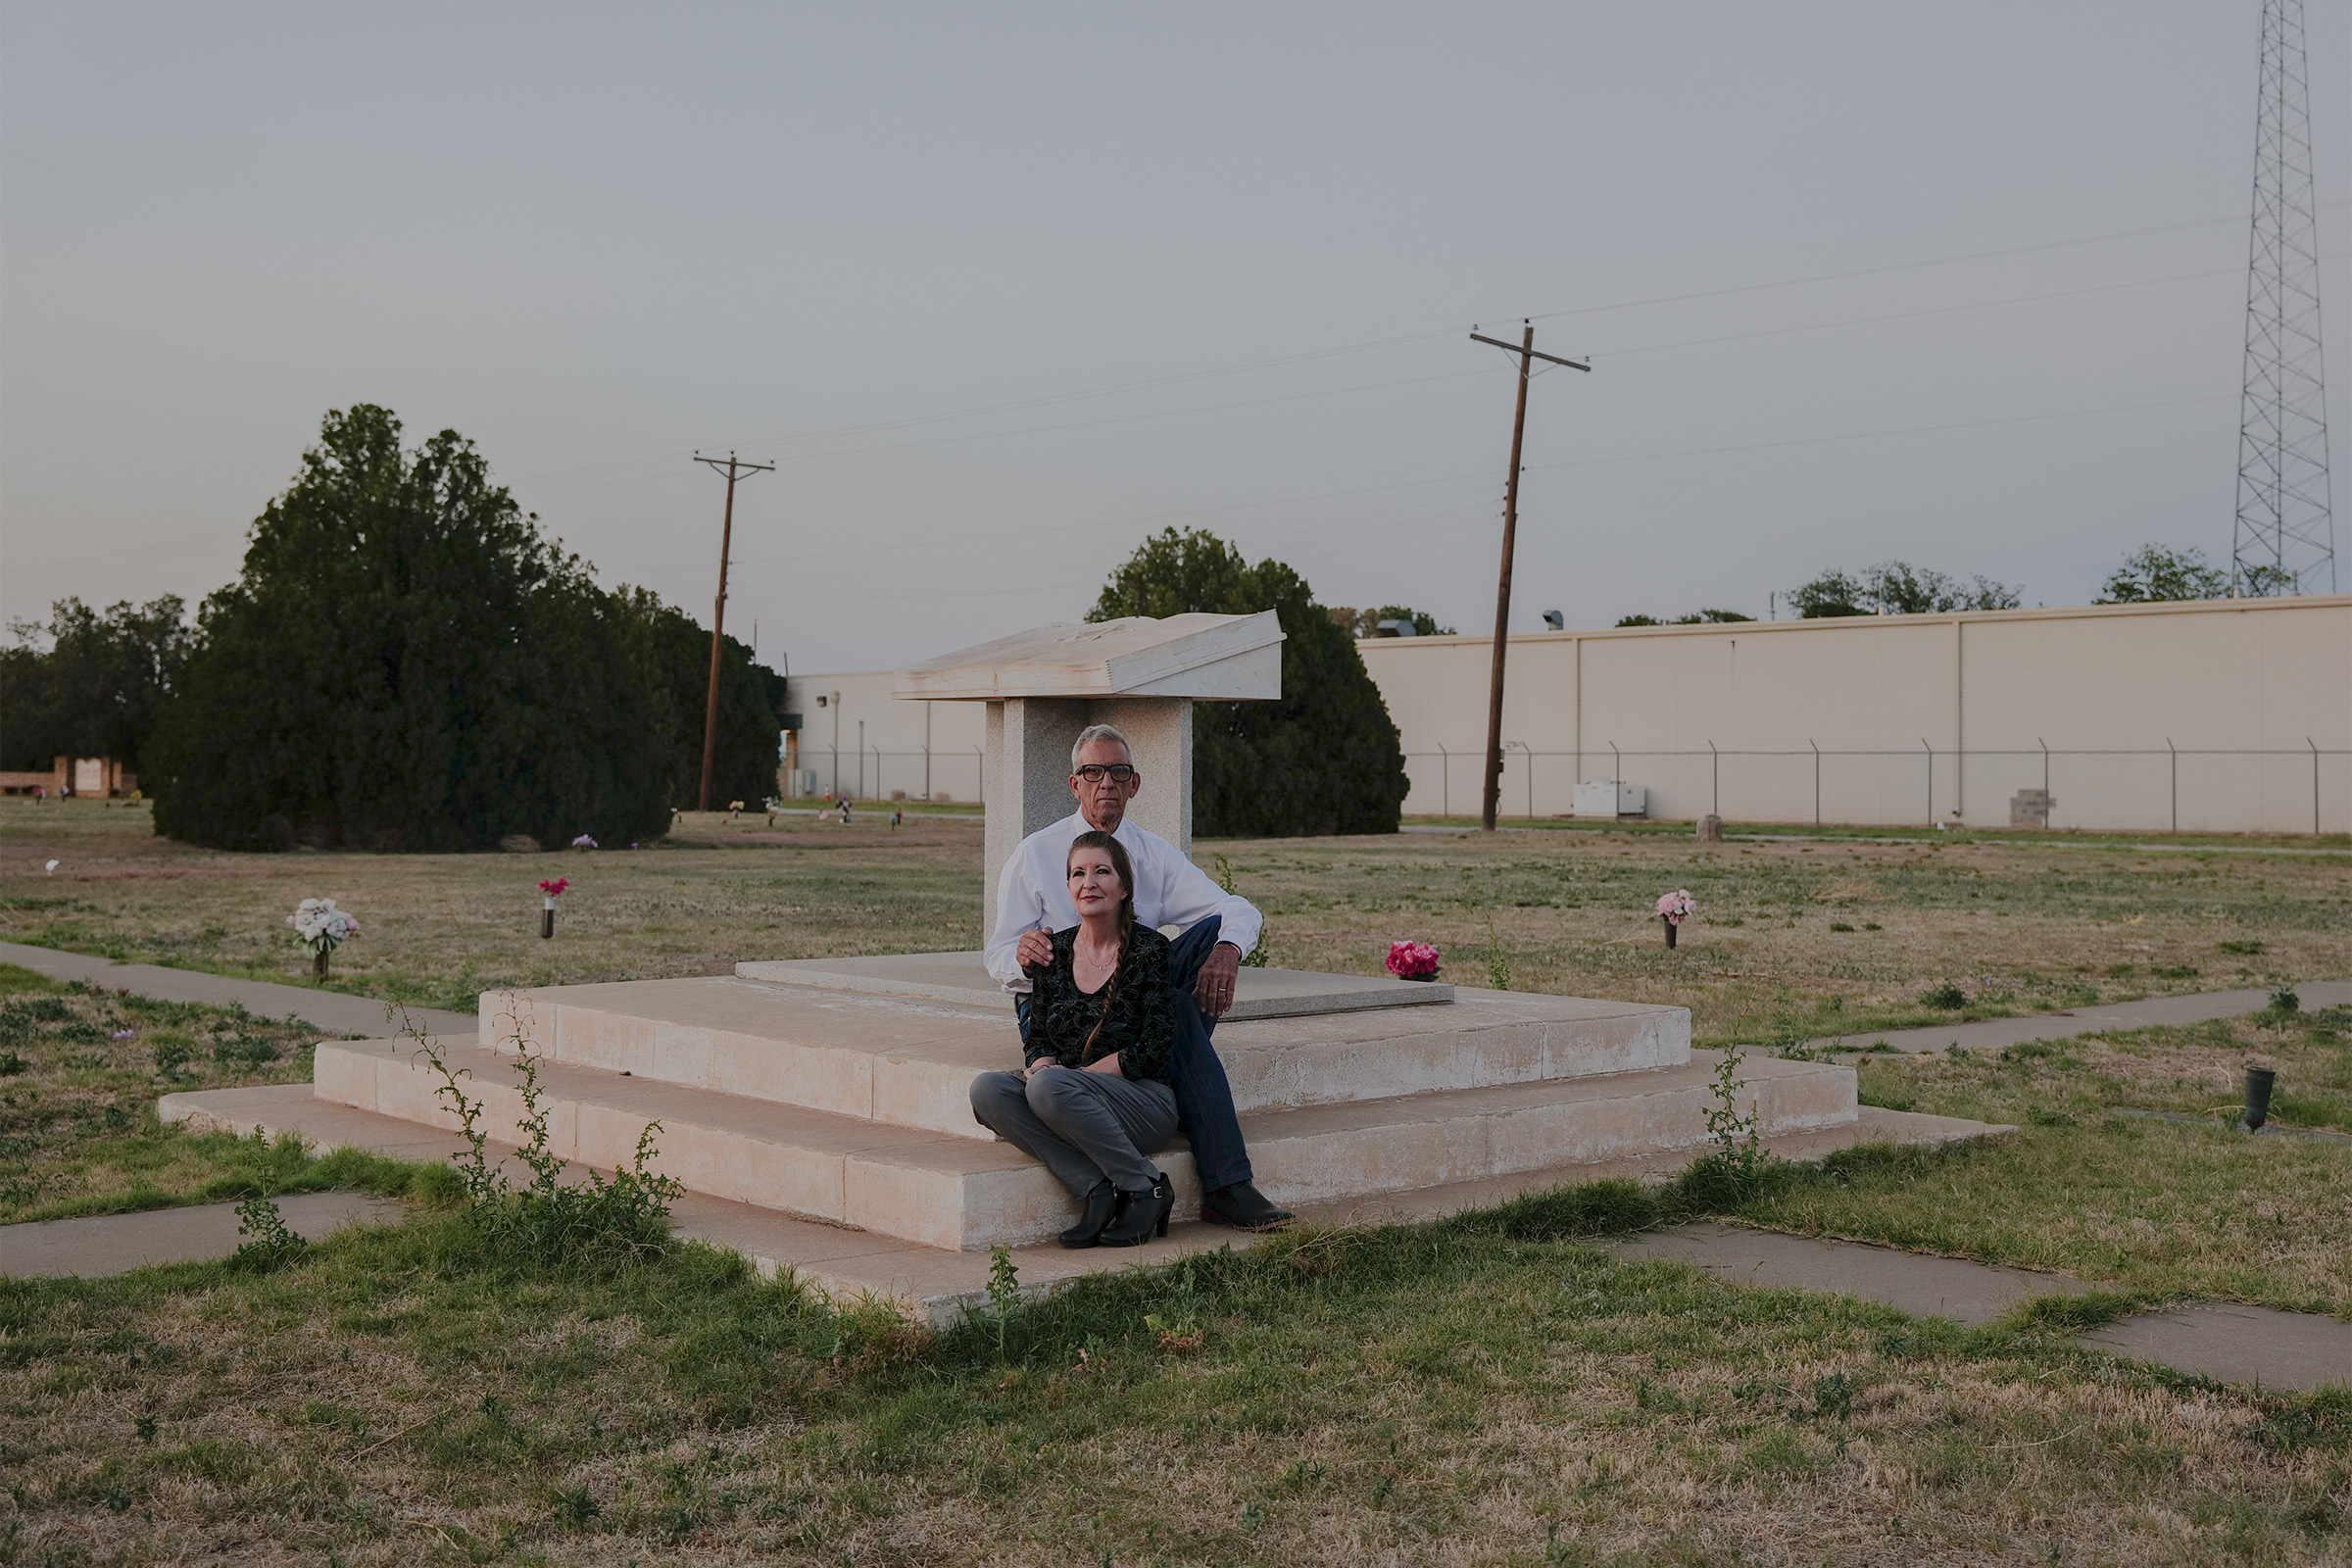 Rhonda and Gary Yesel say they buried more than a hundred victims of the coronavirus in their cemetery outside Littlefield, Tx, working even when they were ill with COVID-19. "Death doesn't stop," Rhonda says. "If we hadn't worked, we'd probably have bodies stacked up at the gate." (September Dawn Bottoms for TIME)